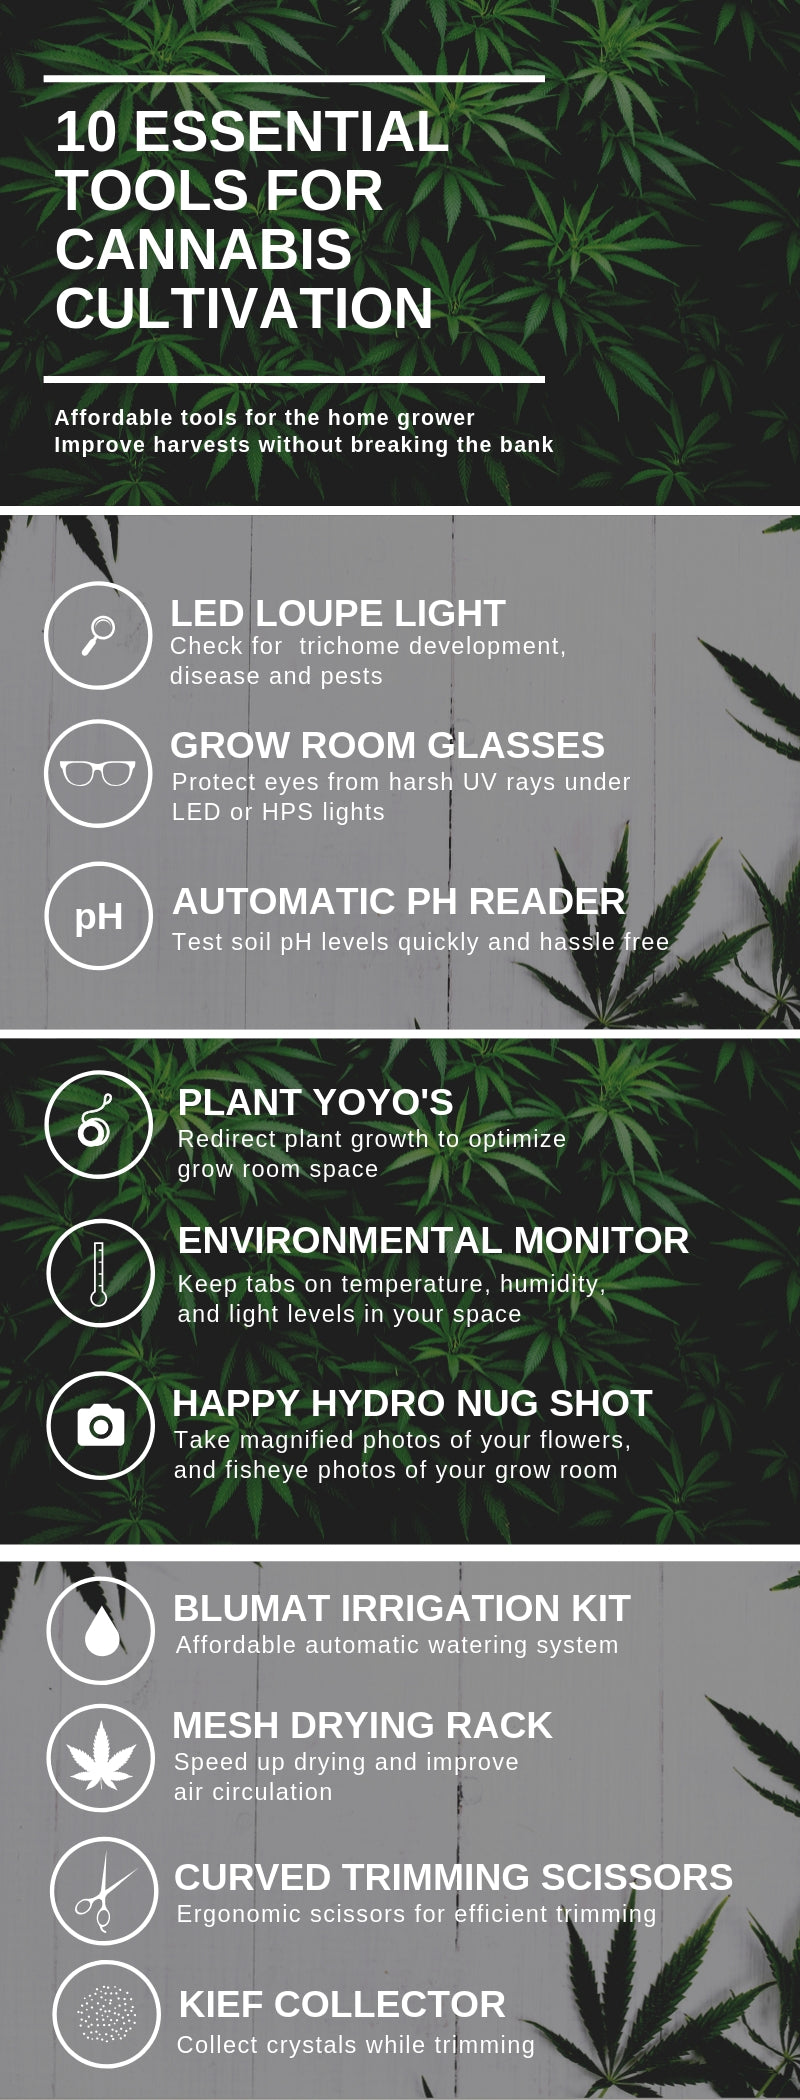 10 Essential Tools for Cannabis Cultivation